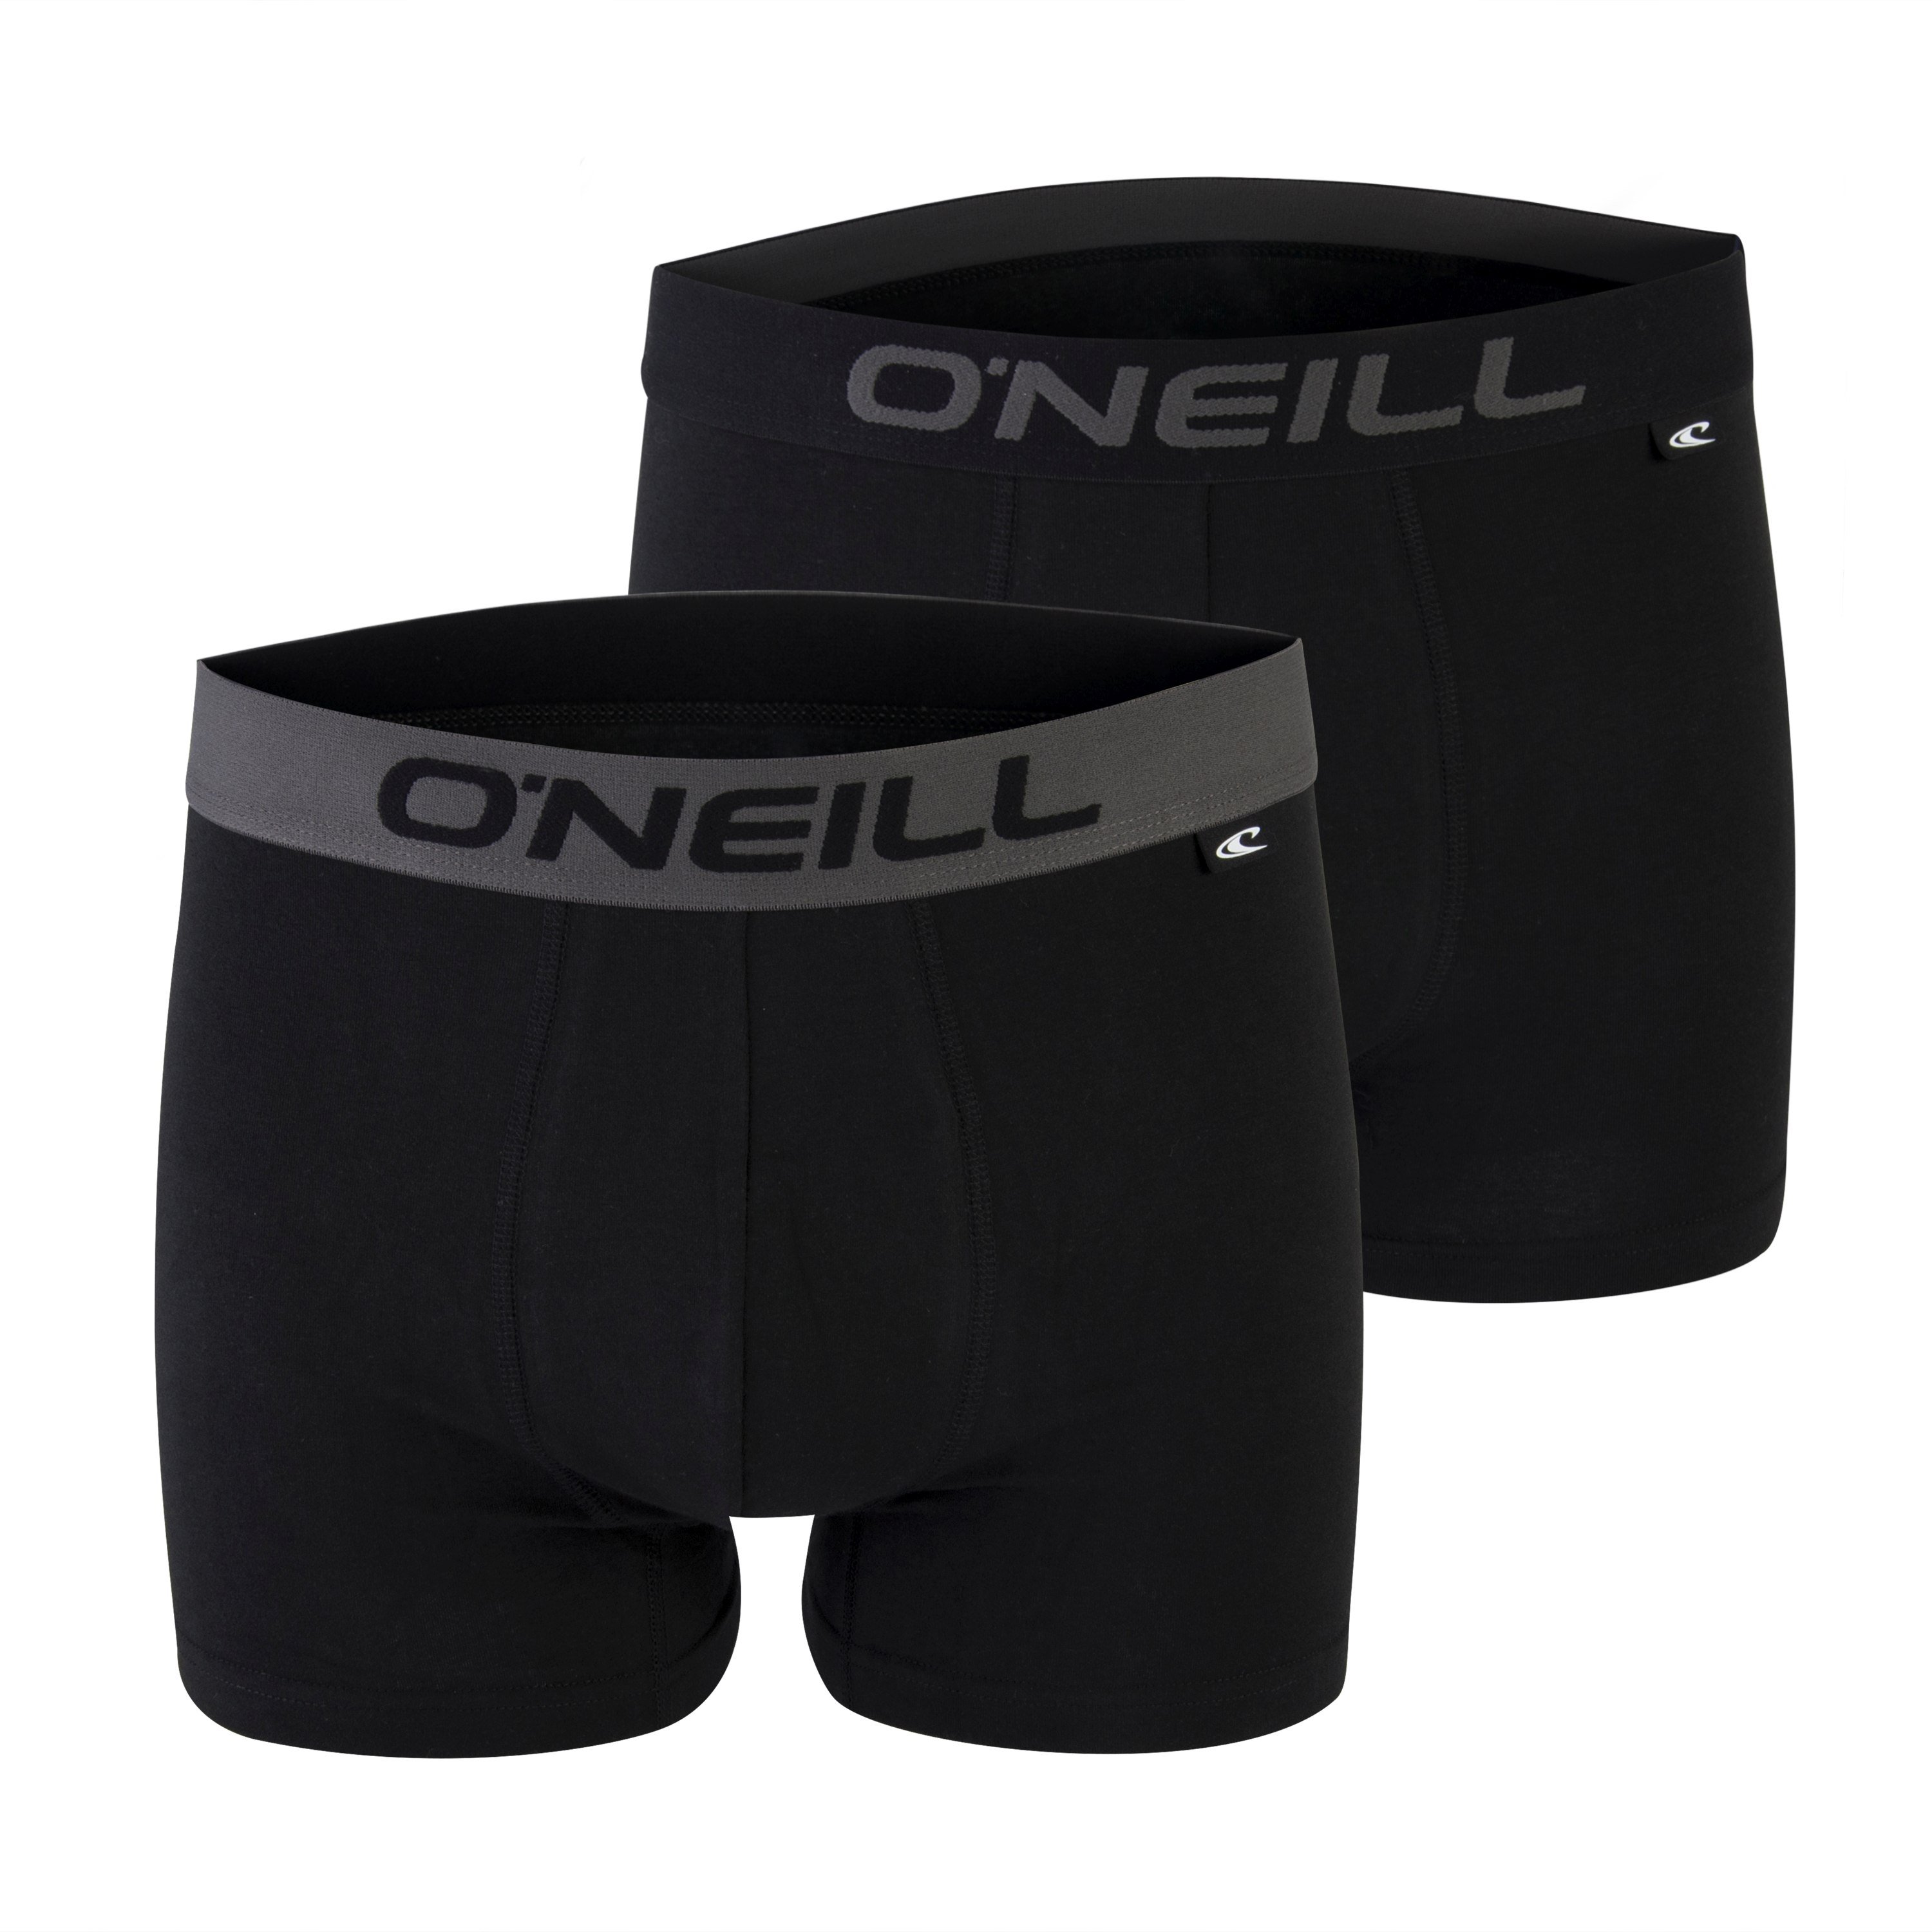 O'Neill 2-pack boxershorts